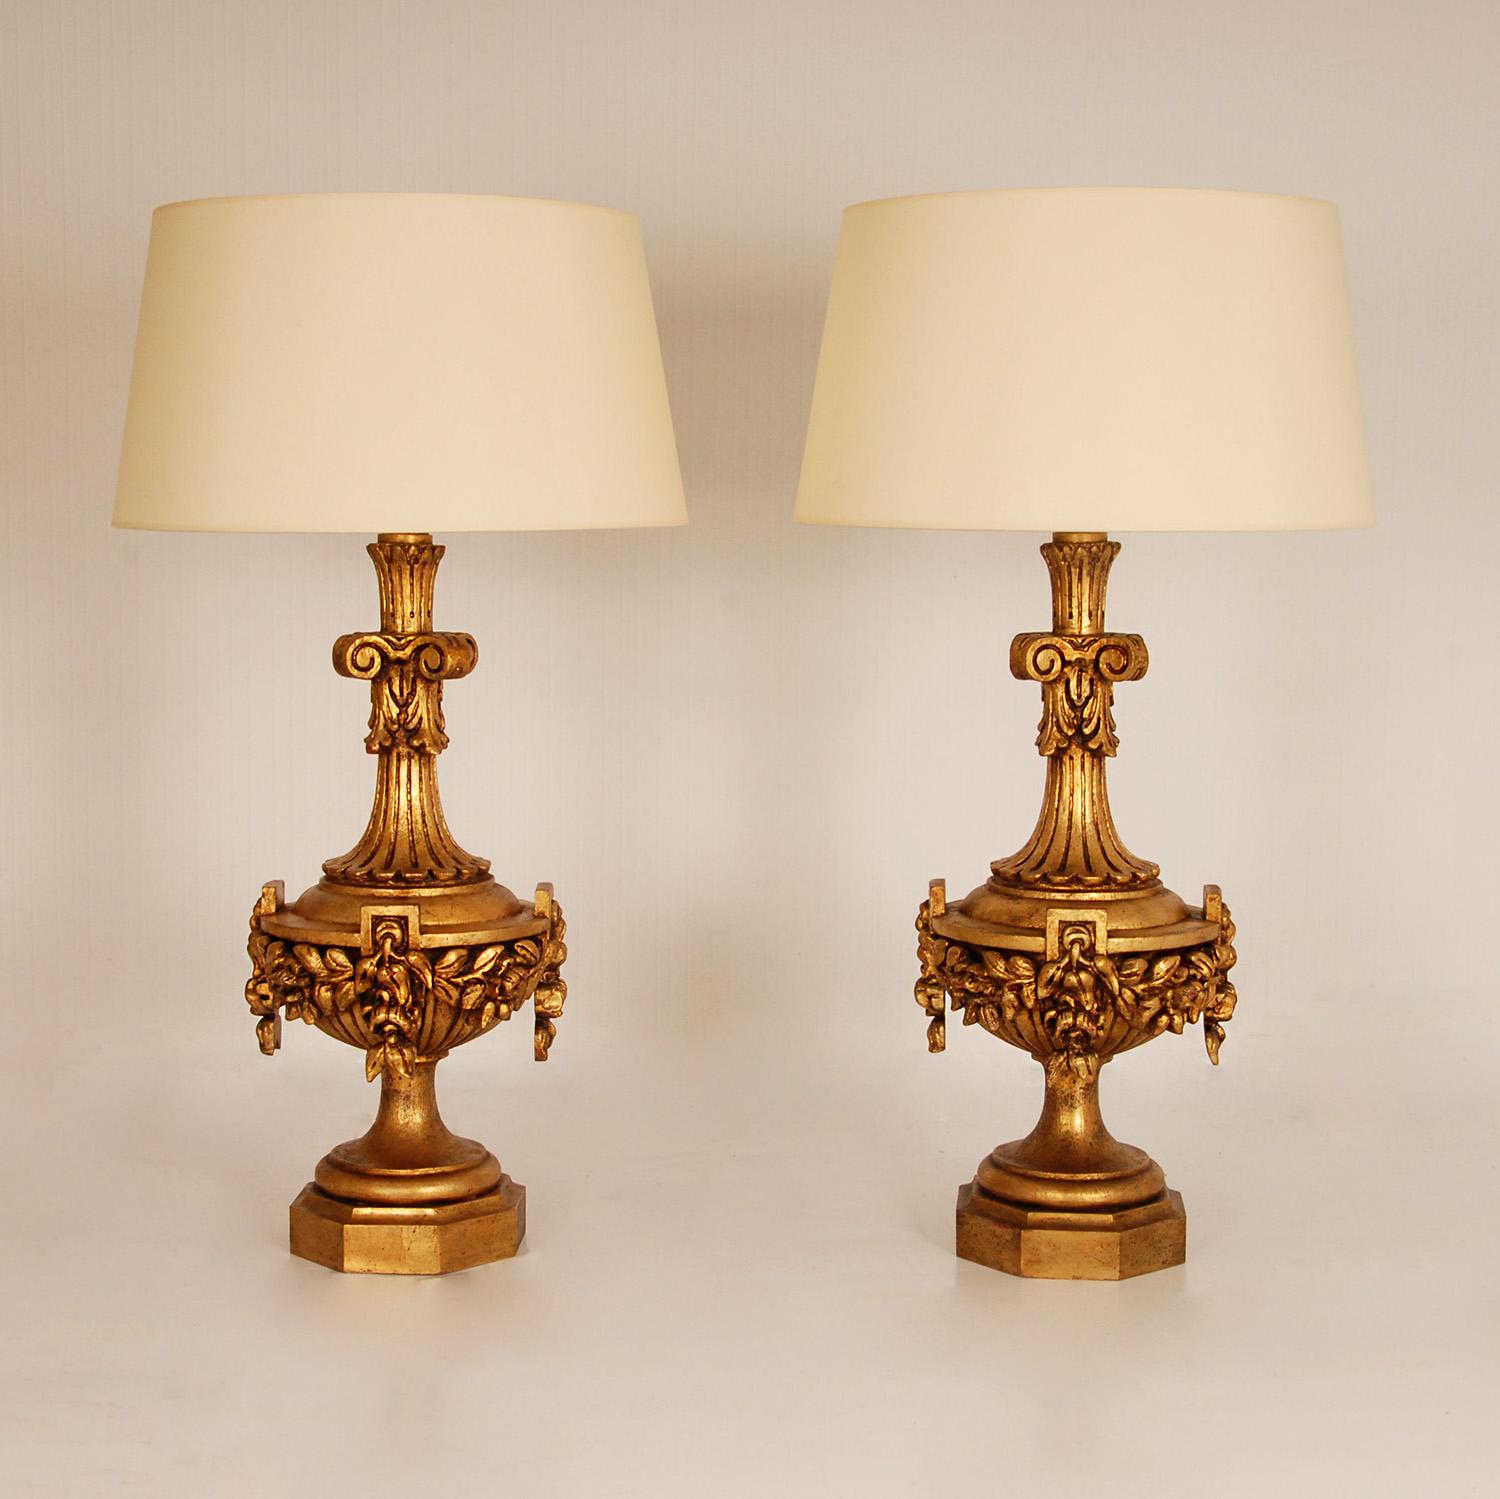 Vintage Italian Gold Giltwood Lamps Carved Neoclassal Vases  Table Lamps a Pair For Sale 7